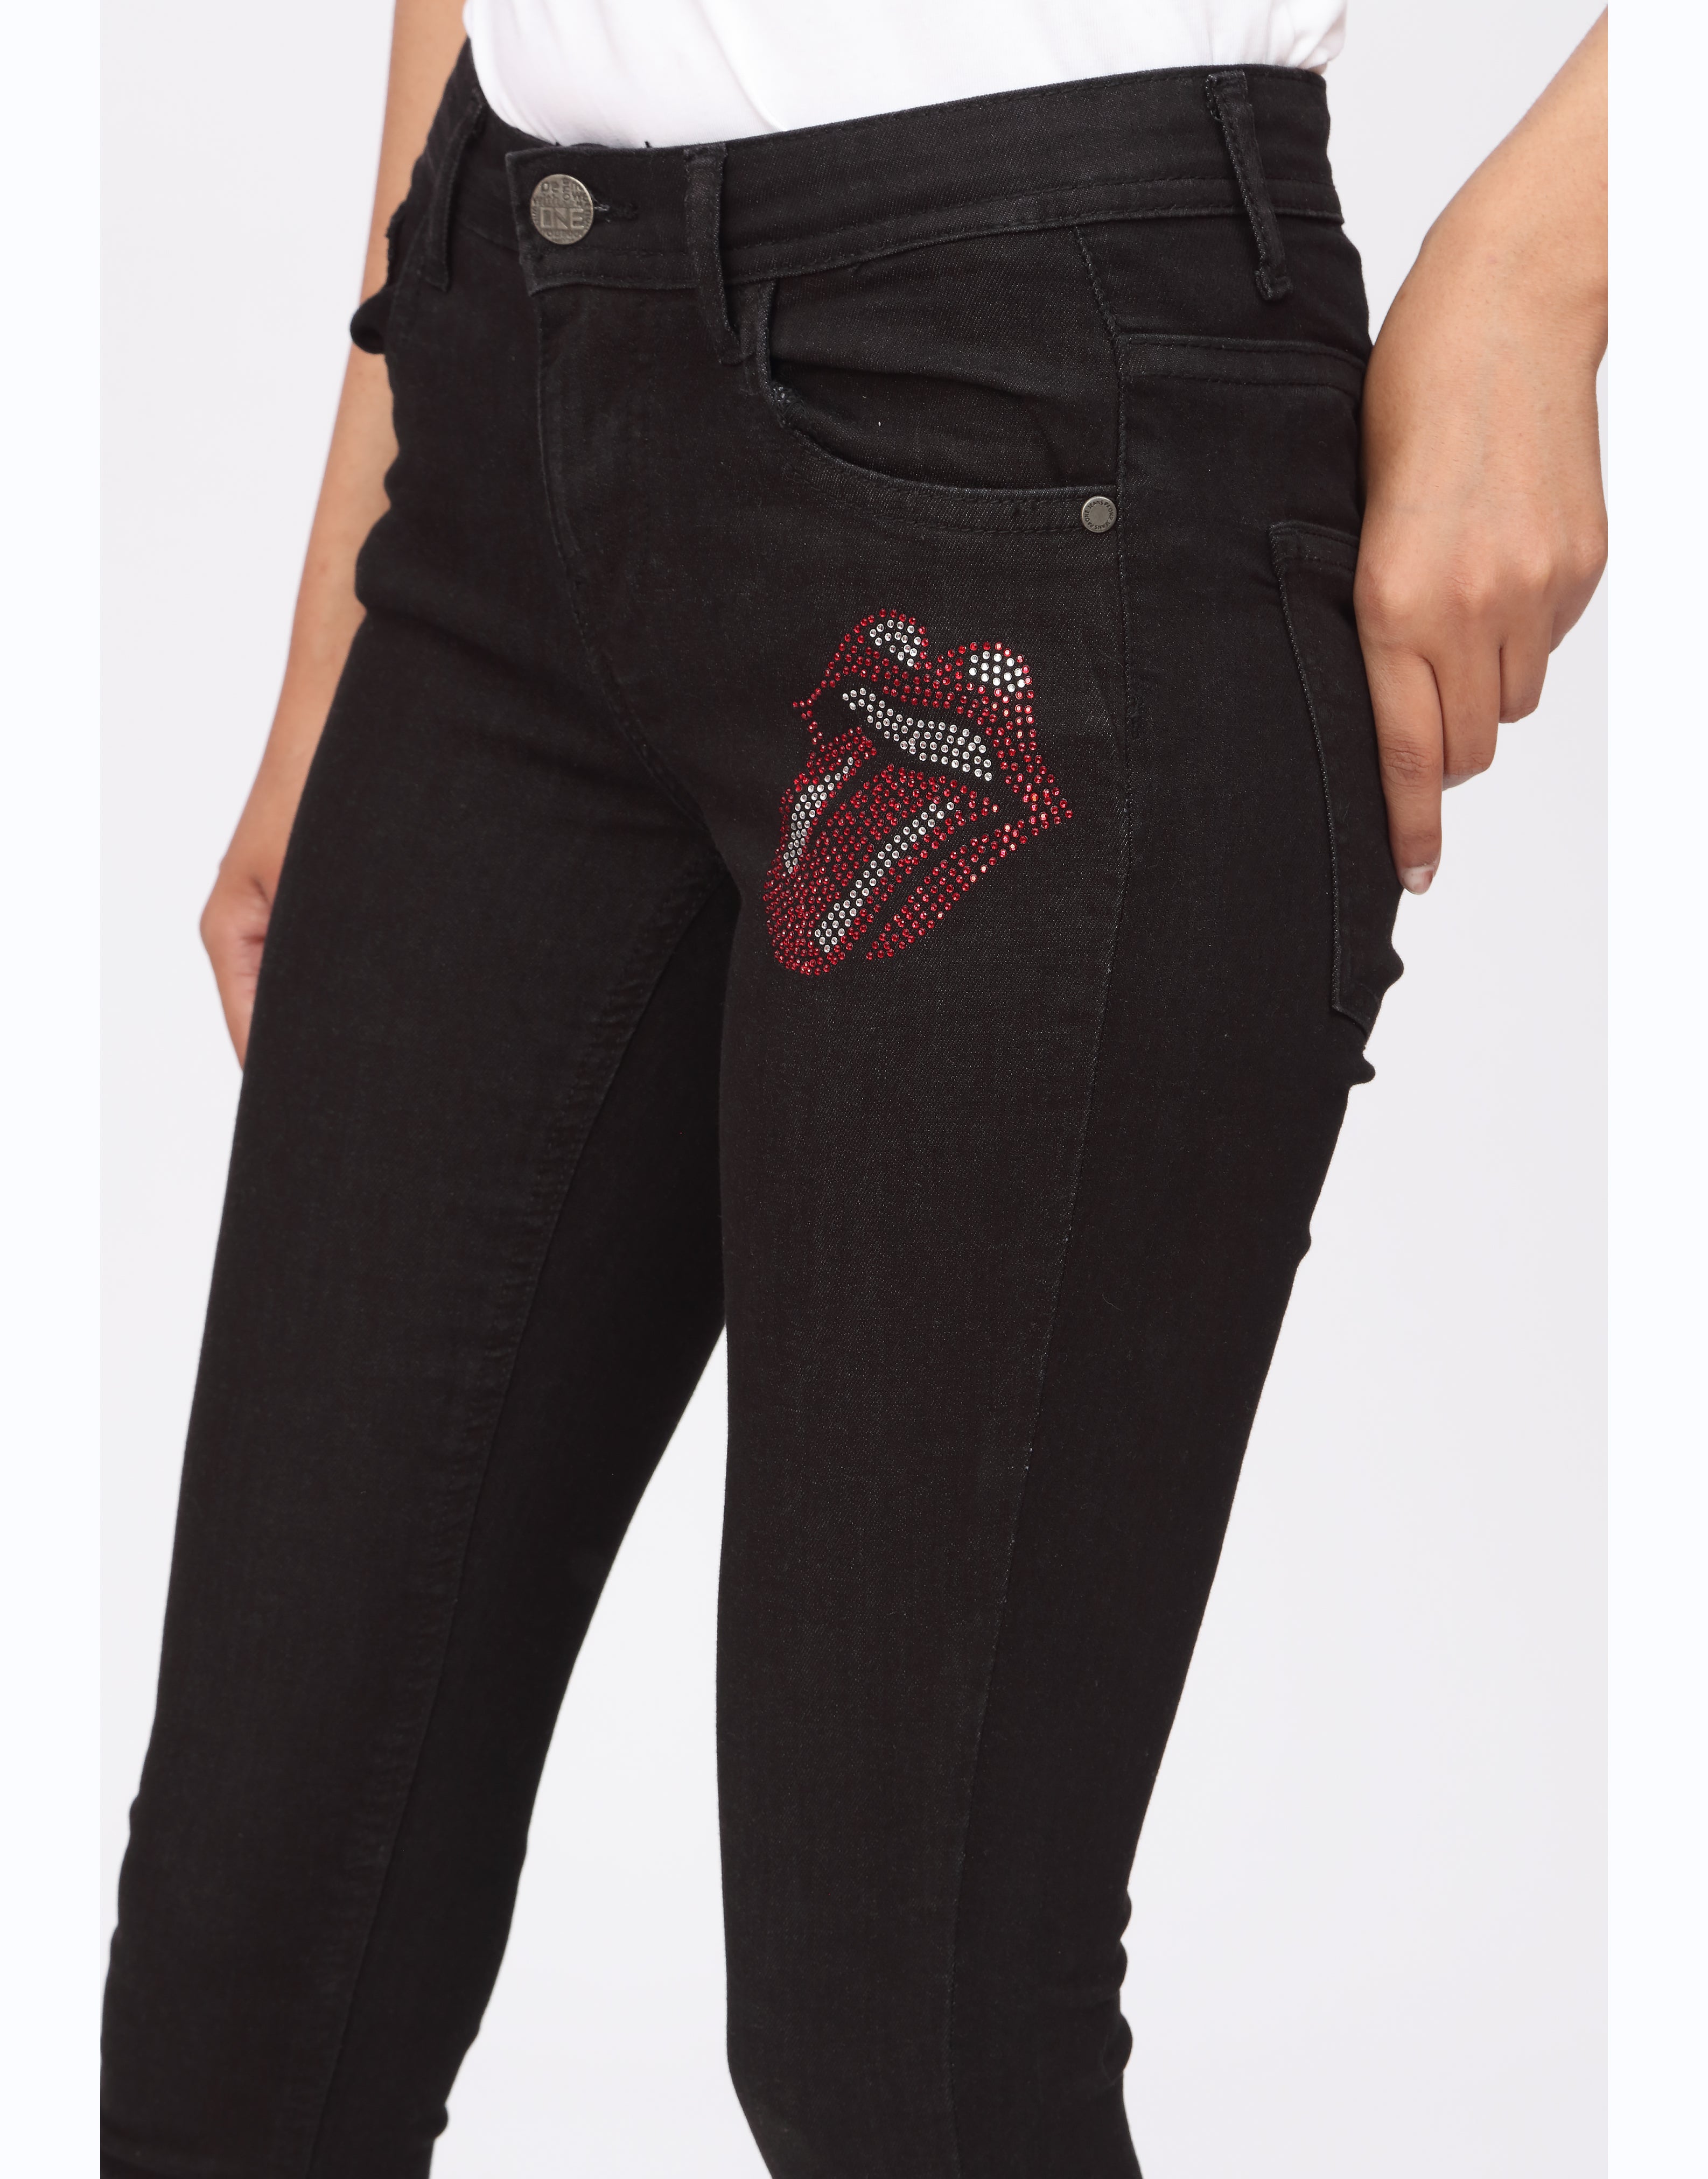 High Rise Skinny Jeans with Sassy Print in Jet Black